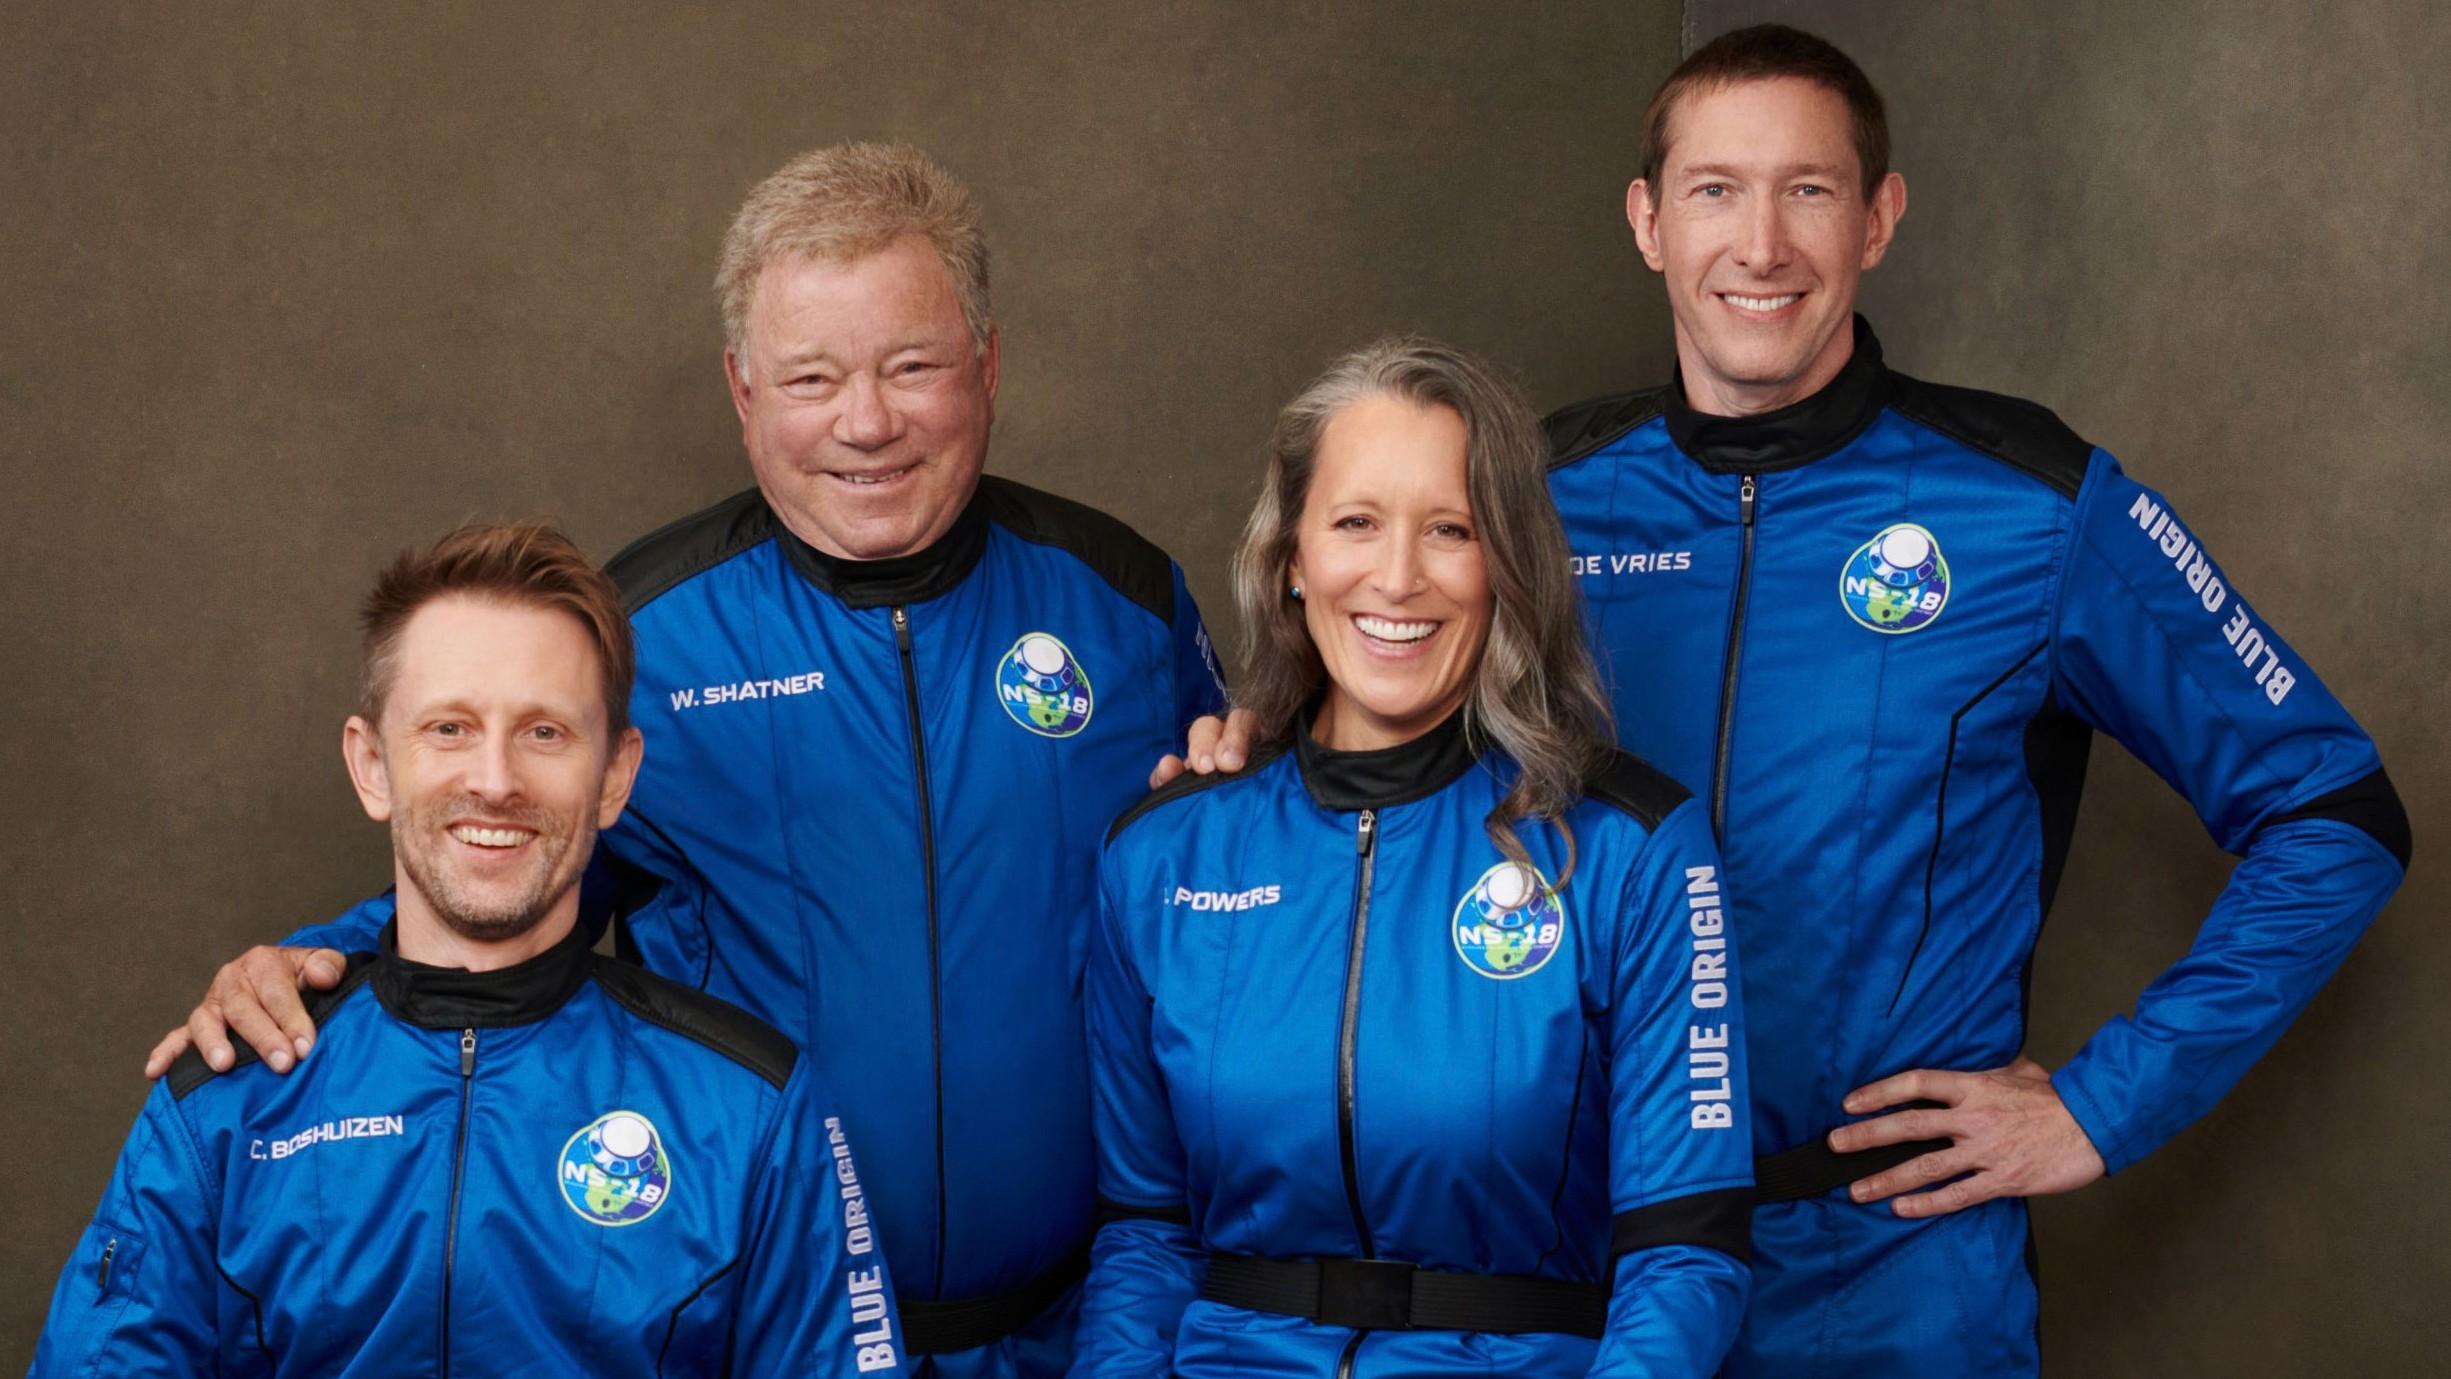 This undated photo made available by Blue Origin in October 2021 shows, from left, Chris Boshuizen, William Shatner, Audrey Powers and Glen de Vries. Their launch scheduled for Wednesday, Oct. 13, 2021 will be Blue Origin’s second passenger flight, using the same capsule and rocket that Jeff Bezos used for his own trip three months earlier. (Blue Origin via AP)